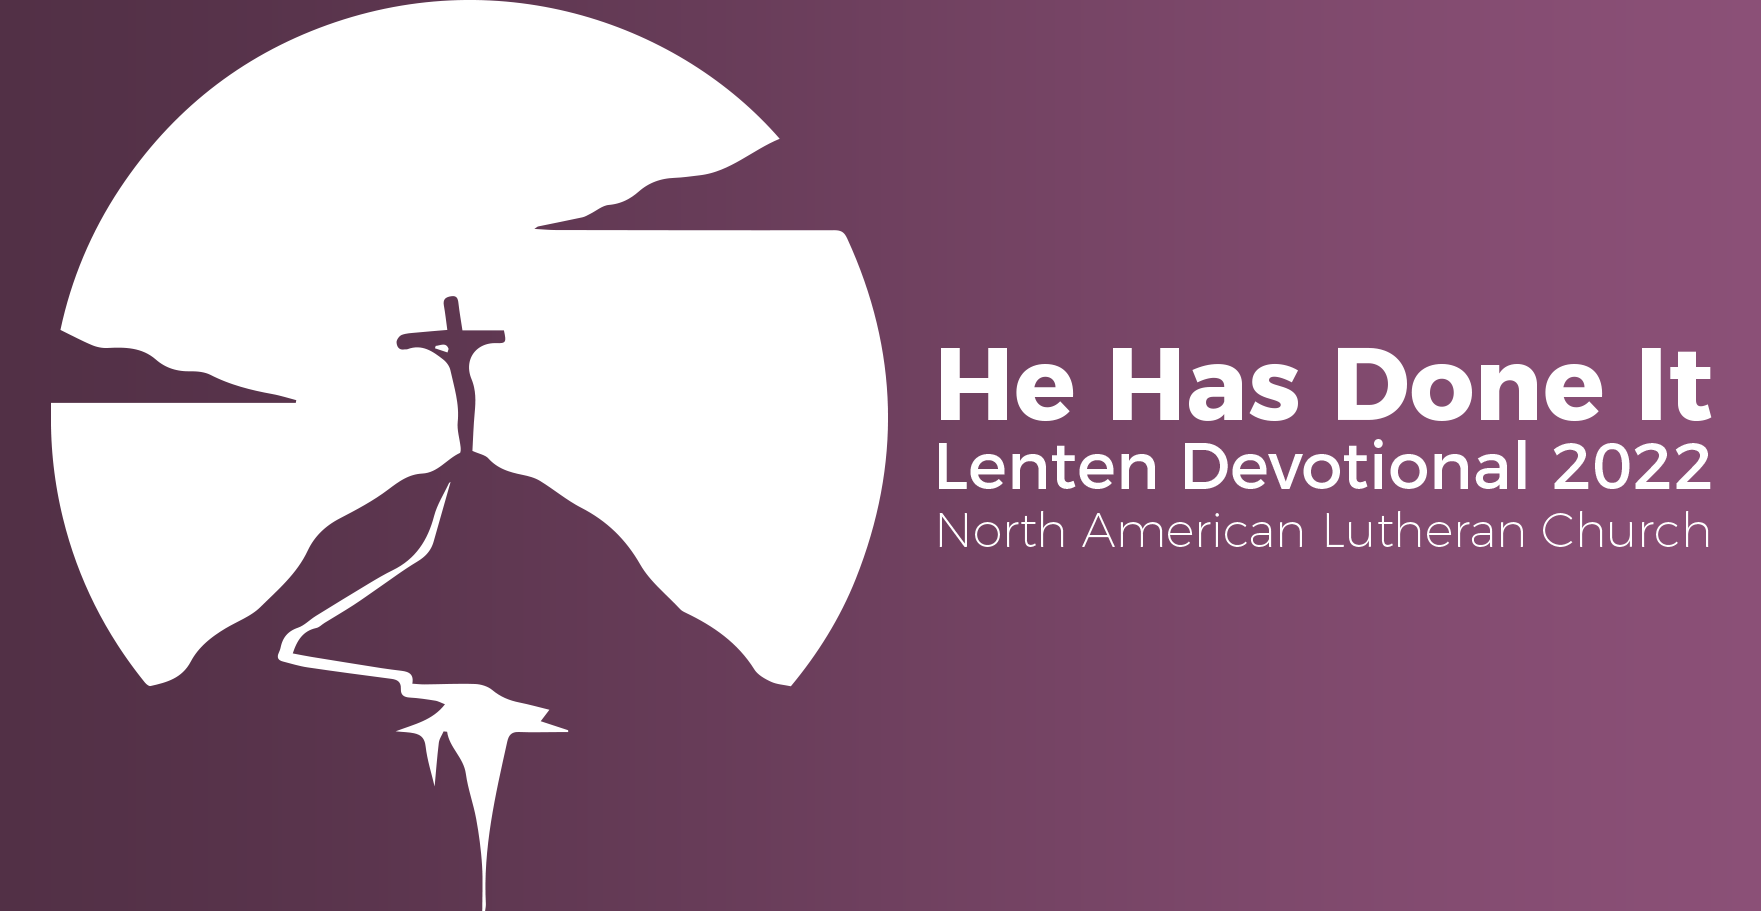 March 16, 2022 | Wednesday of the Week of Lent II